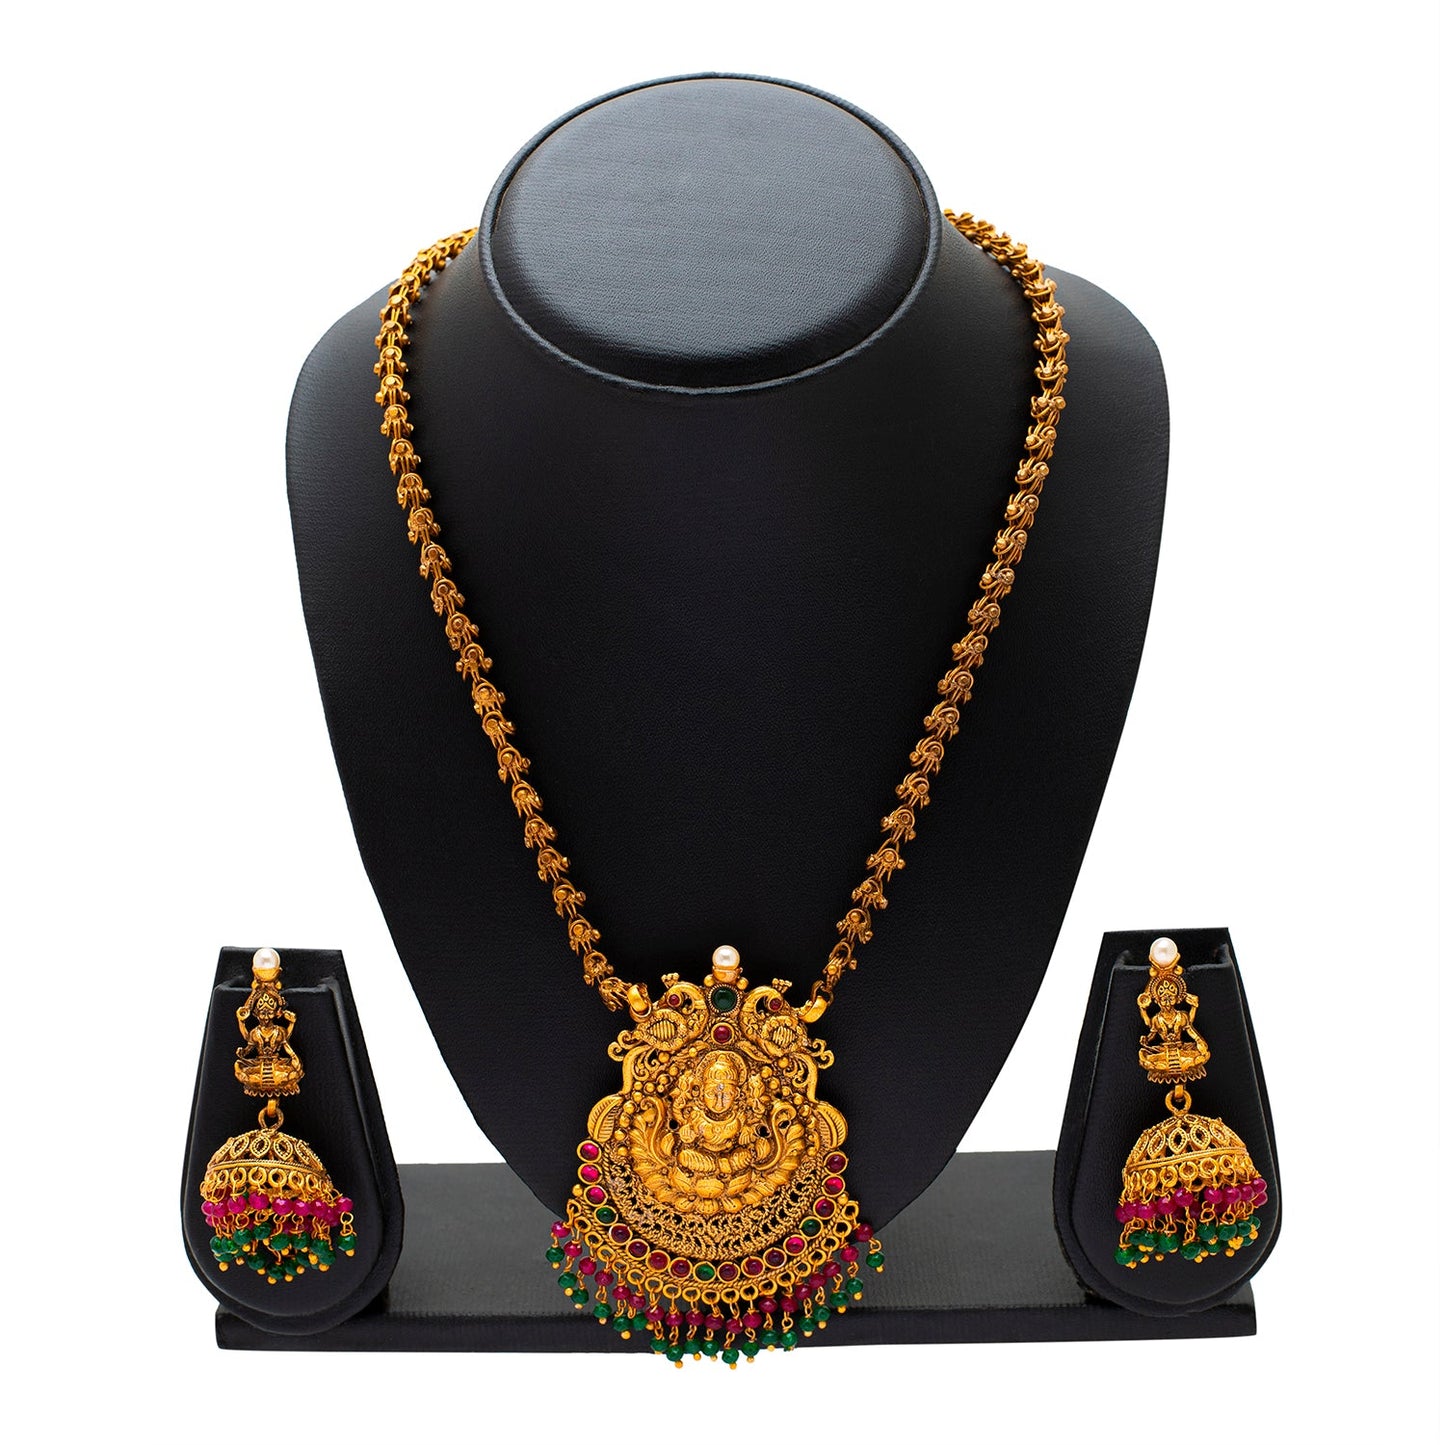 Shining Jewel Handcrafted Antique Gold Plated Godess Lakshmi Temple Jewellery Necklace With Matching Jhumka Earring For Women (SJN_126)